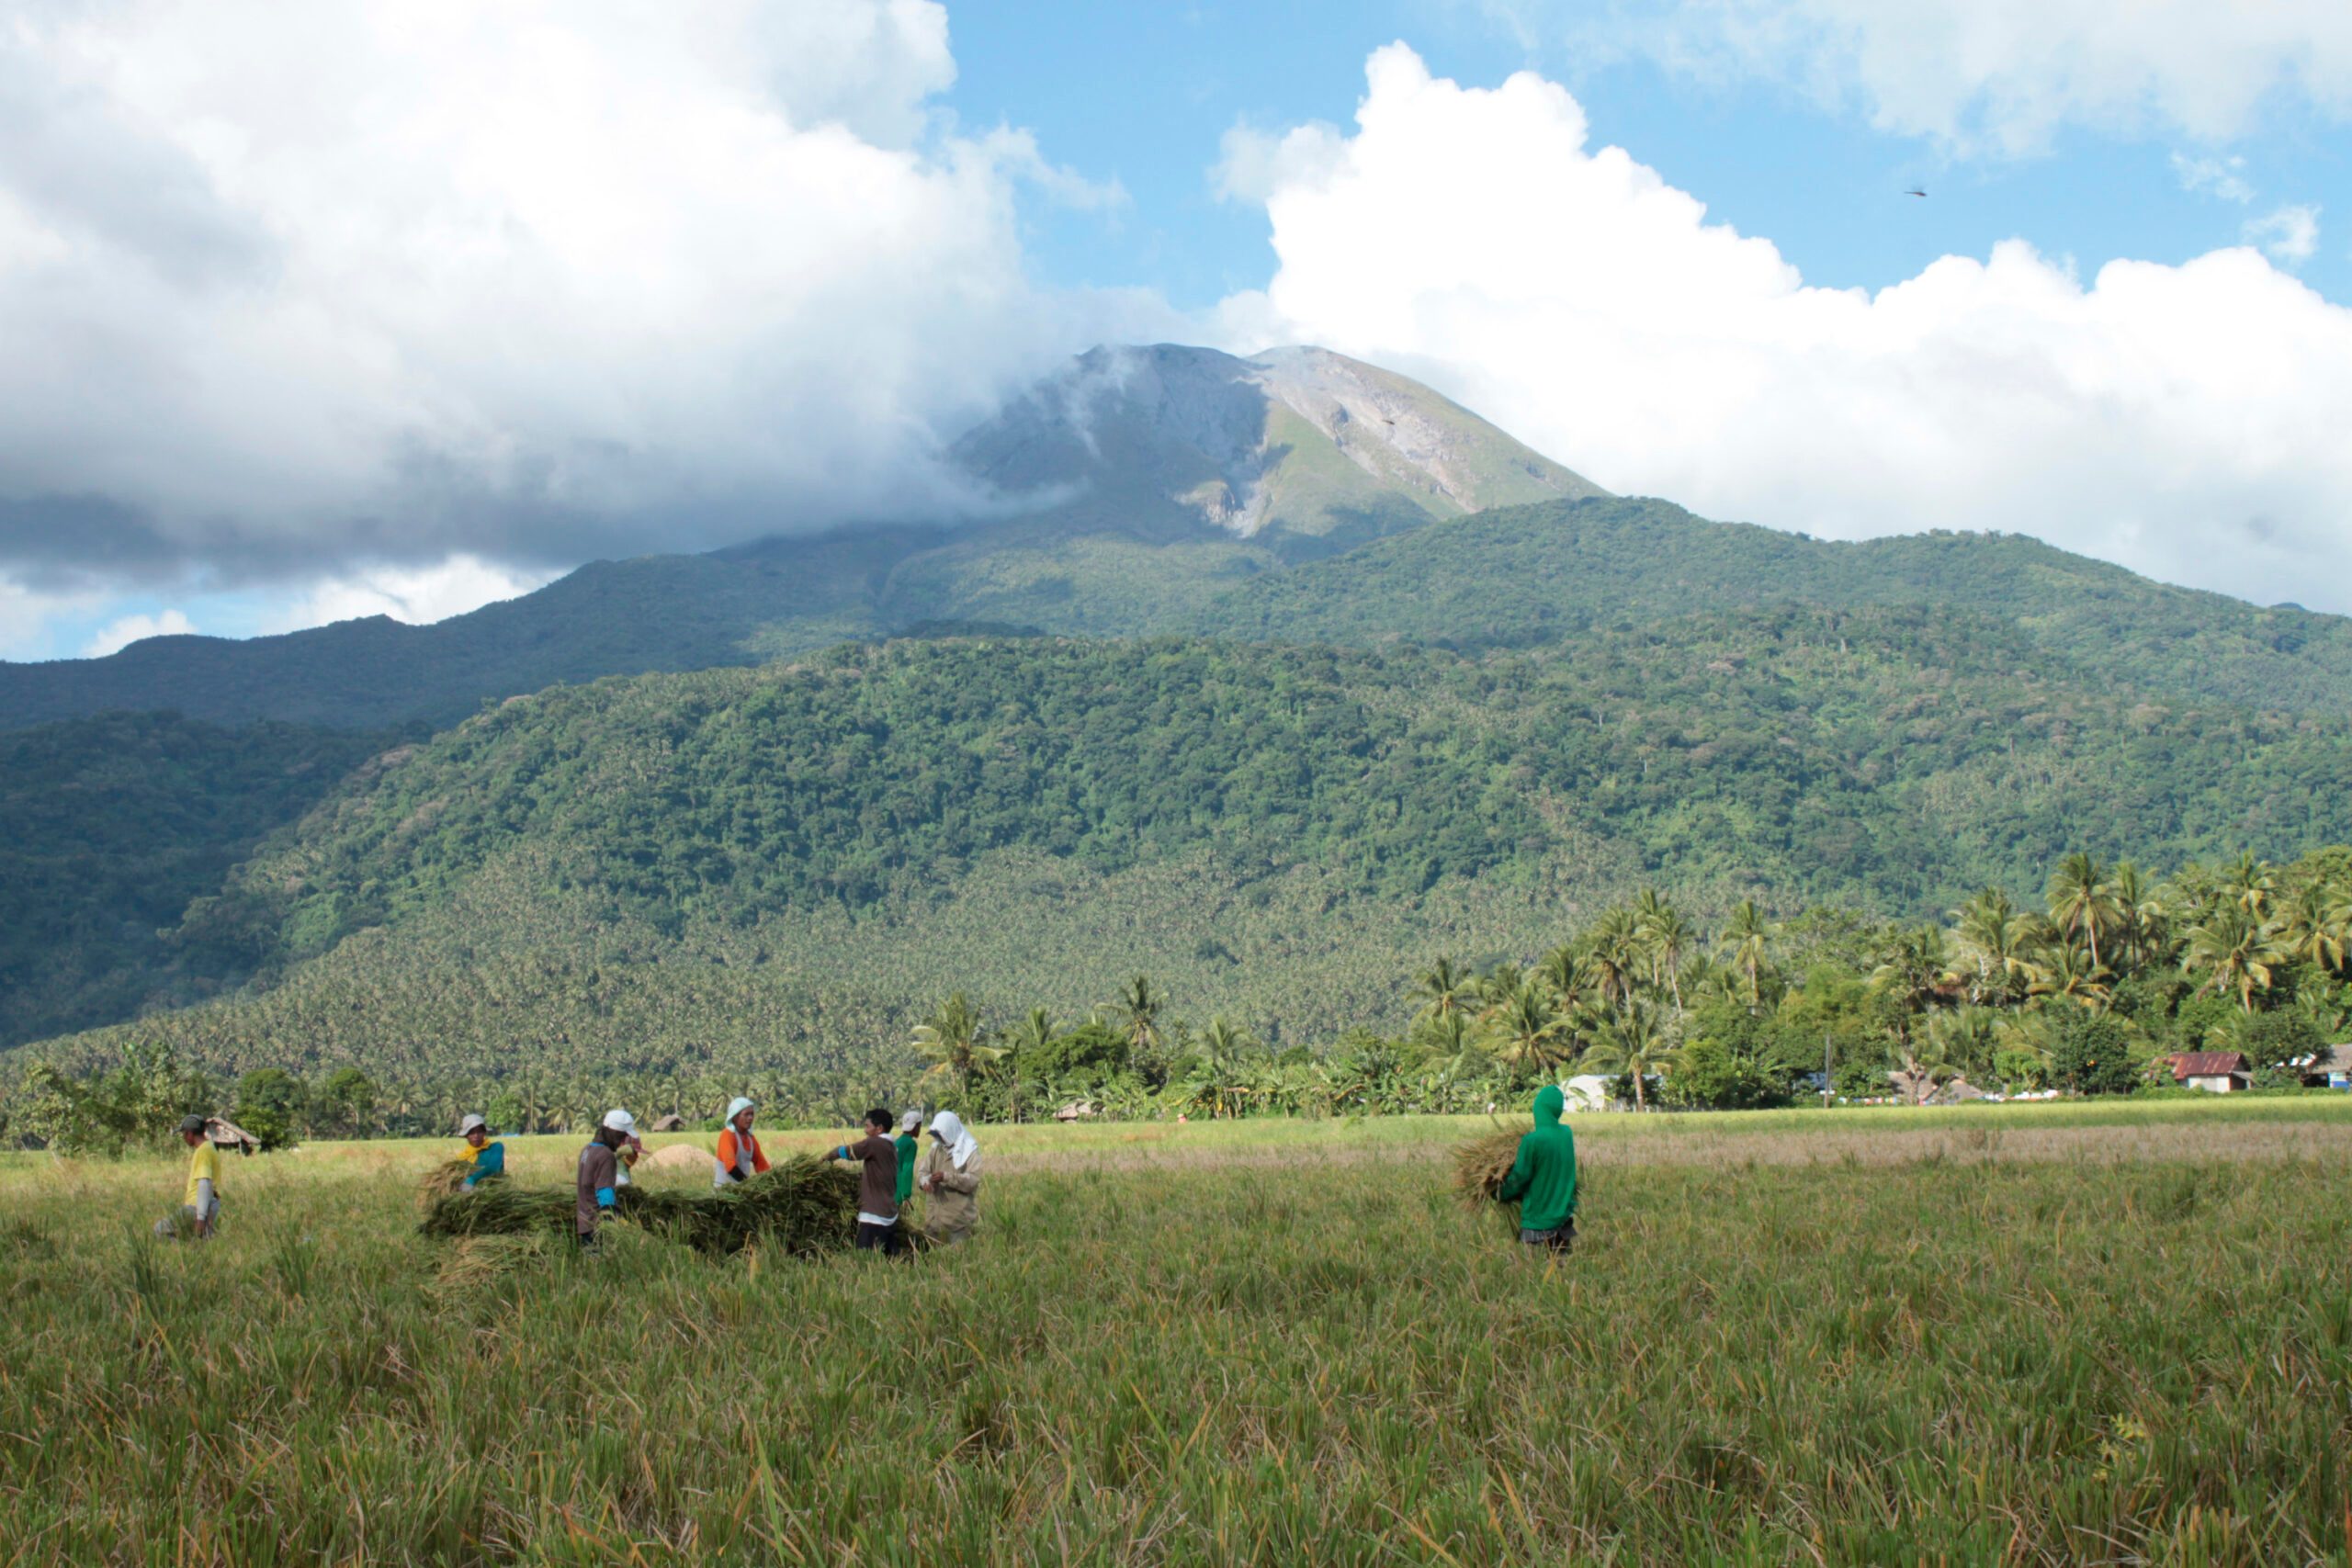 FAST FACTS: Mt Bulusan, the PH’s 4th most active volcano